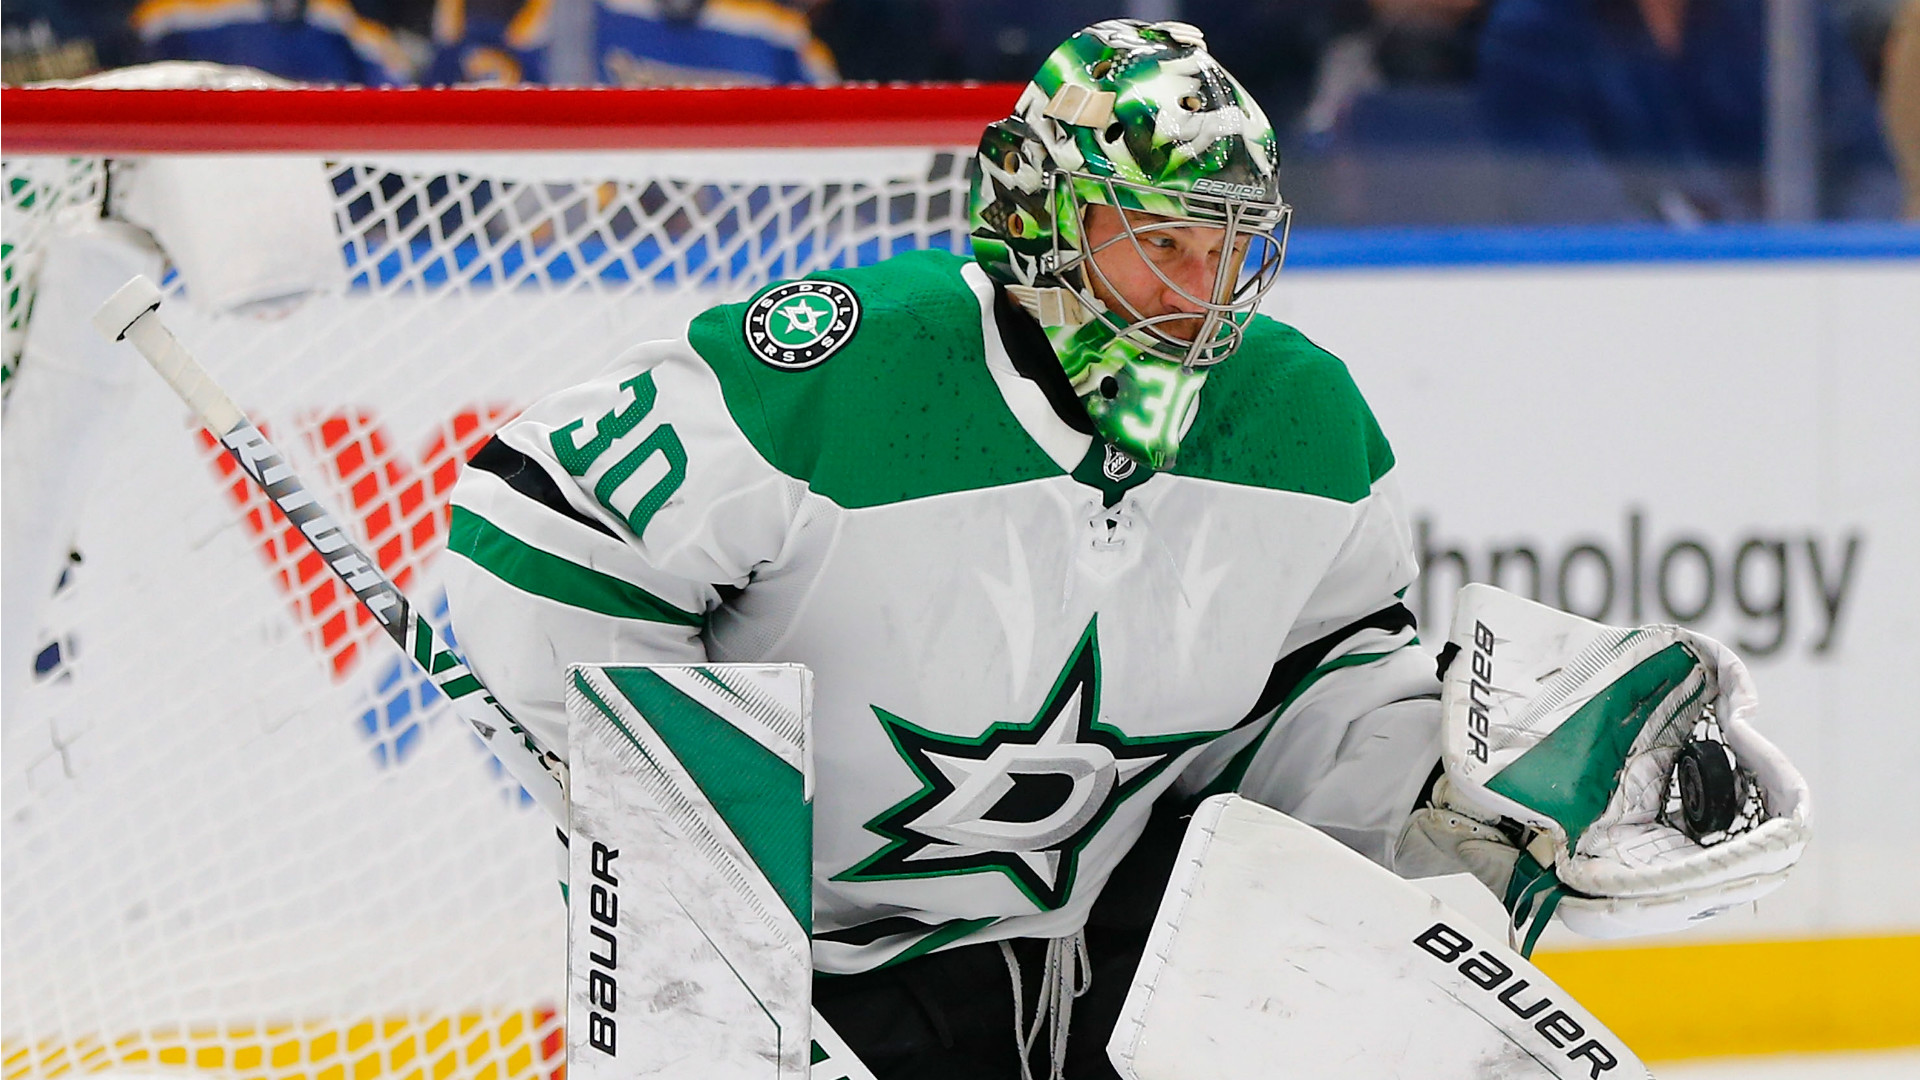 NHL playoffs 2019: Ben Bishop leads Stars to Game 5 victory over Blues | Sporting News